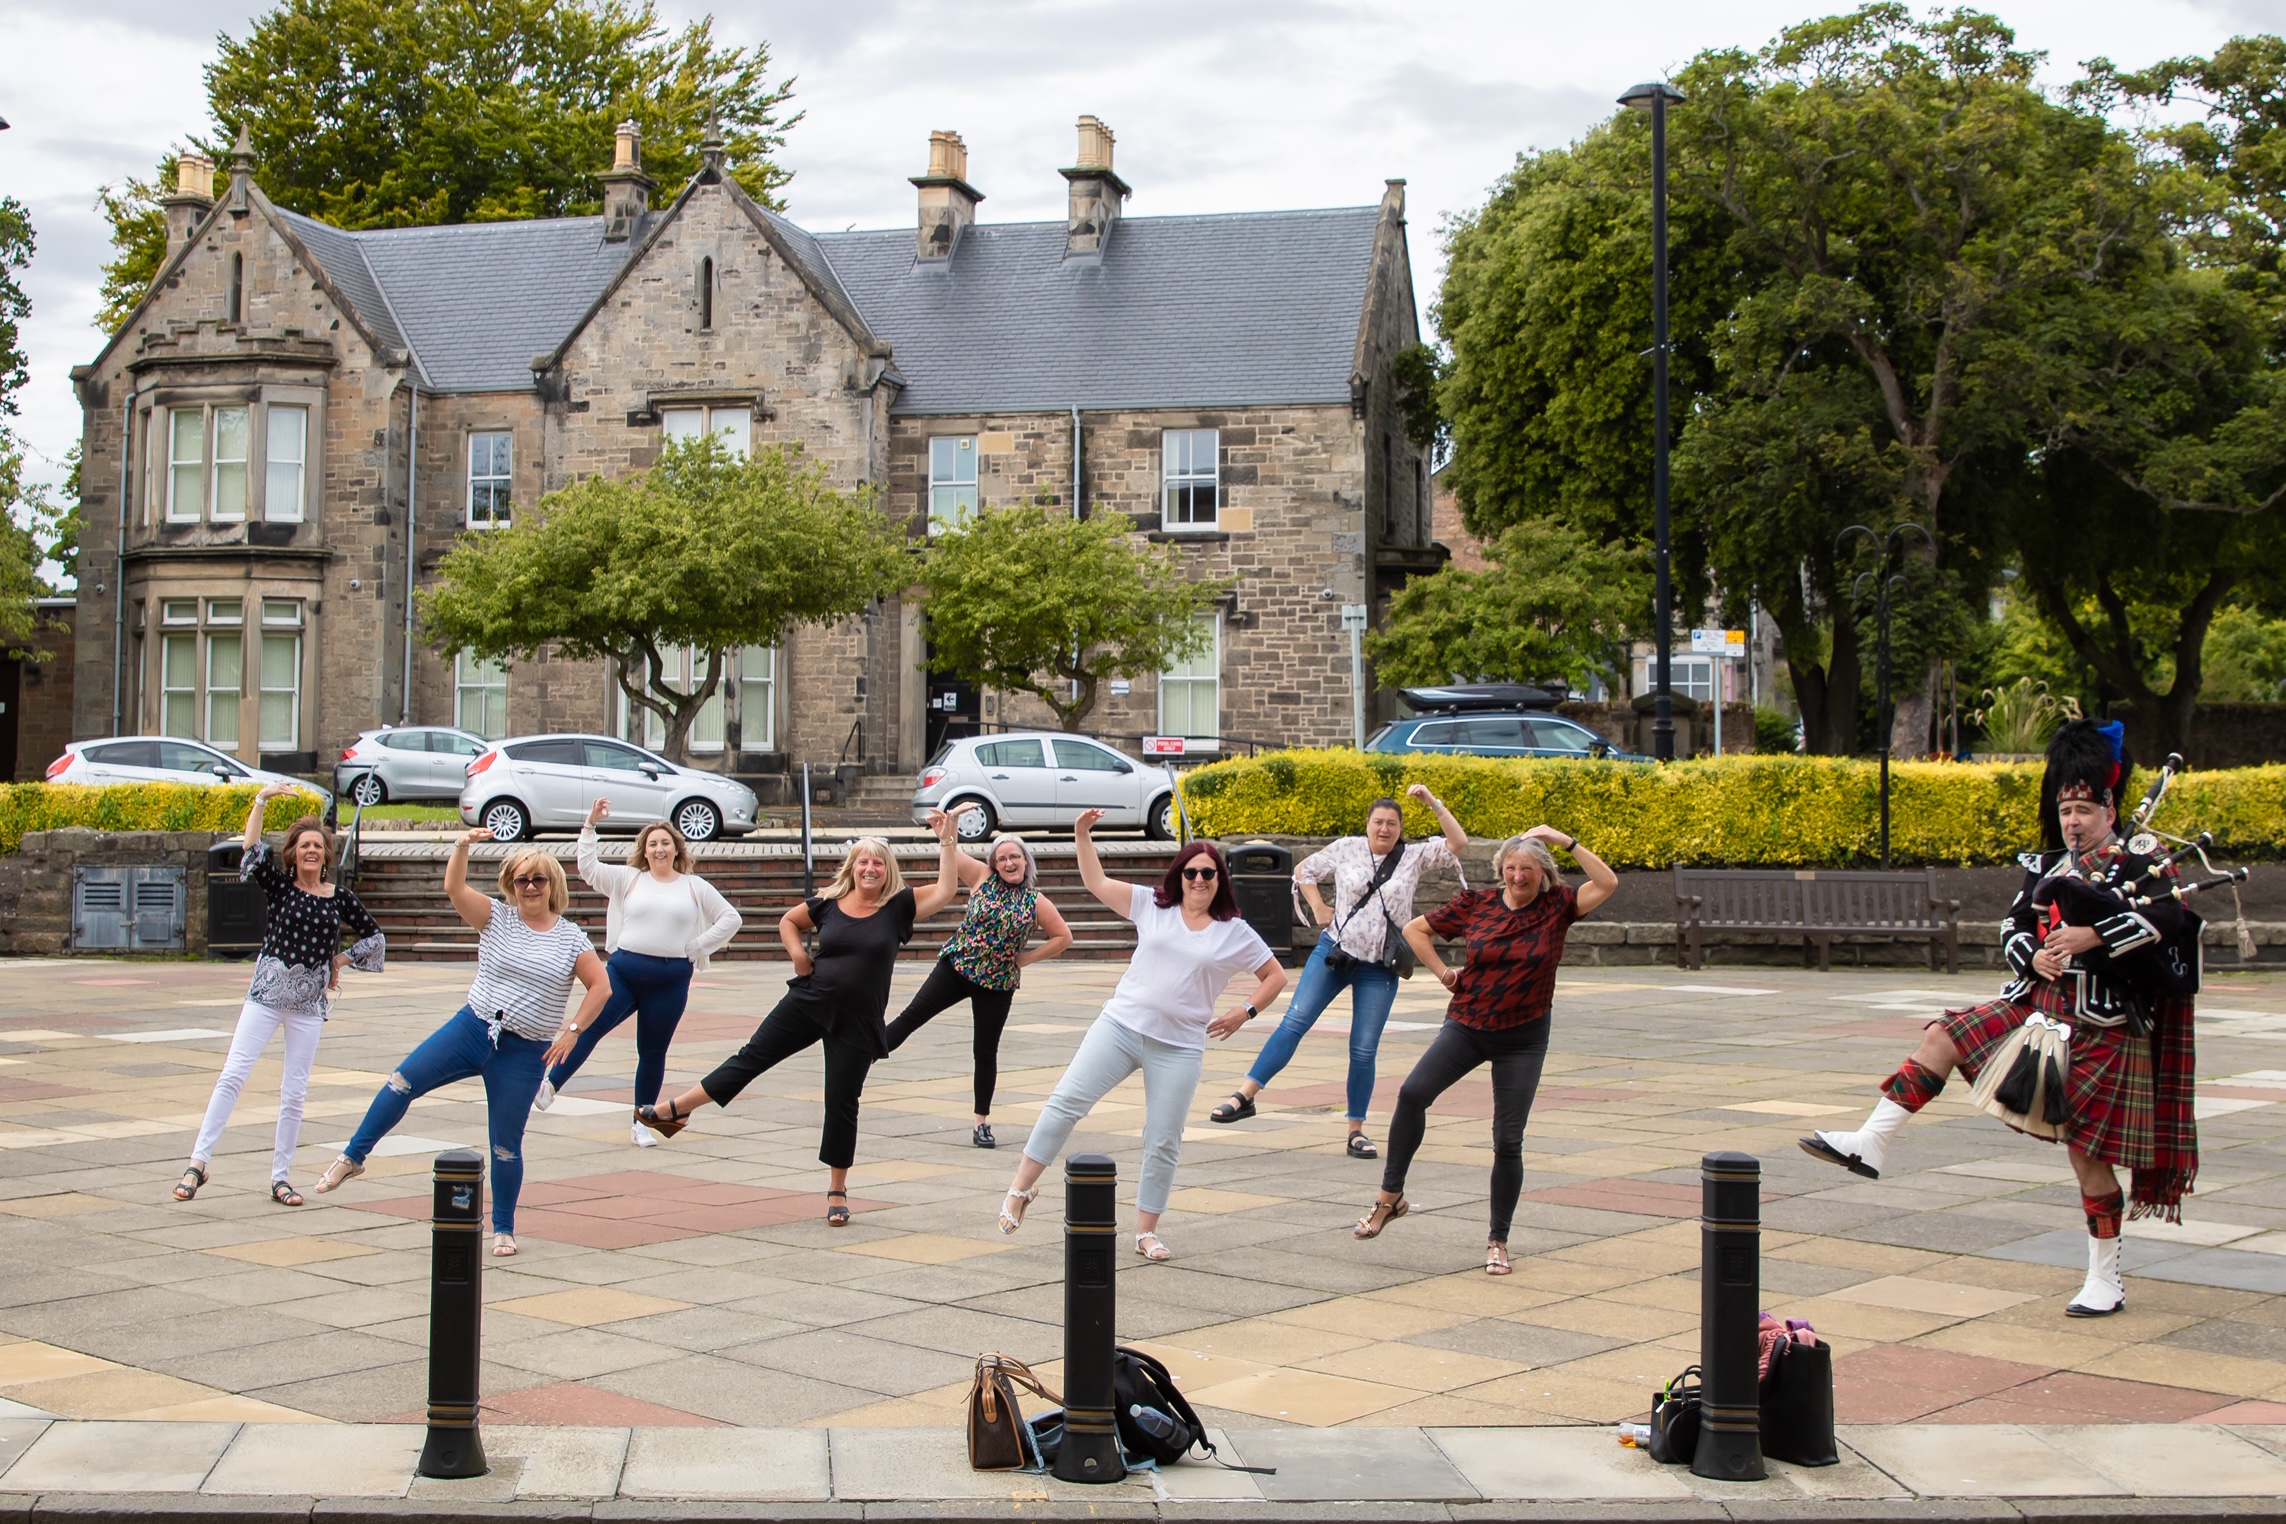 Friends of the bride perform their impromptu dance routine outside Kirkcaldy Town House.